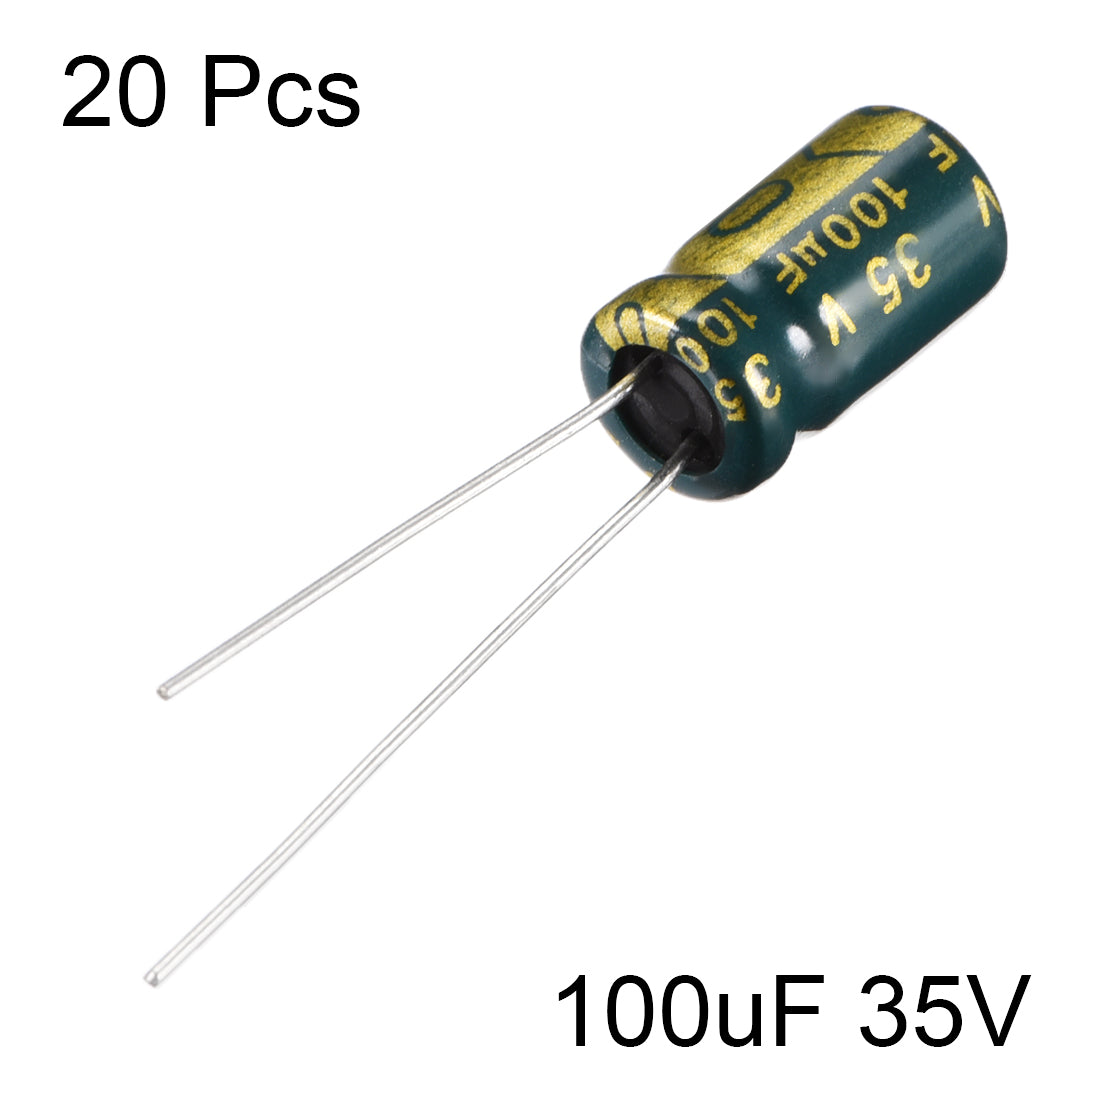 uxcell Uxcell Aluminum Radial Electrolytic Capacitor Low ESR Green with 100uF 35V 105 Celsius Life 3000H 6.3 x 11 mm High Ripple Current,Low Impedance 20pcs